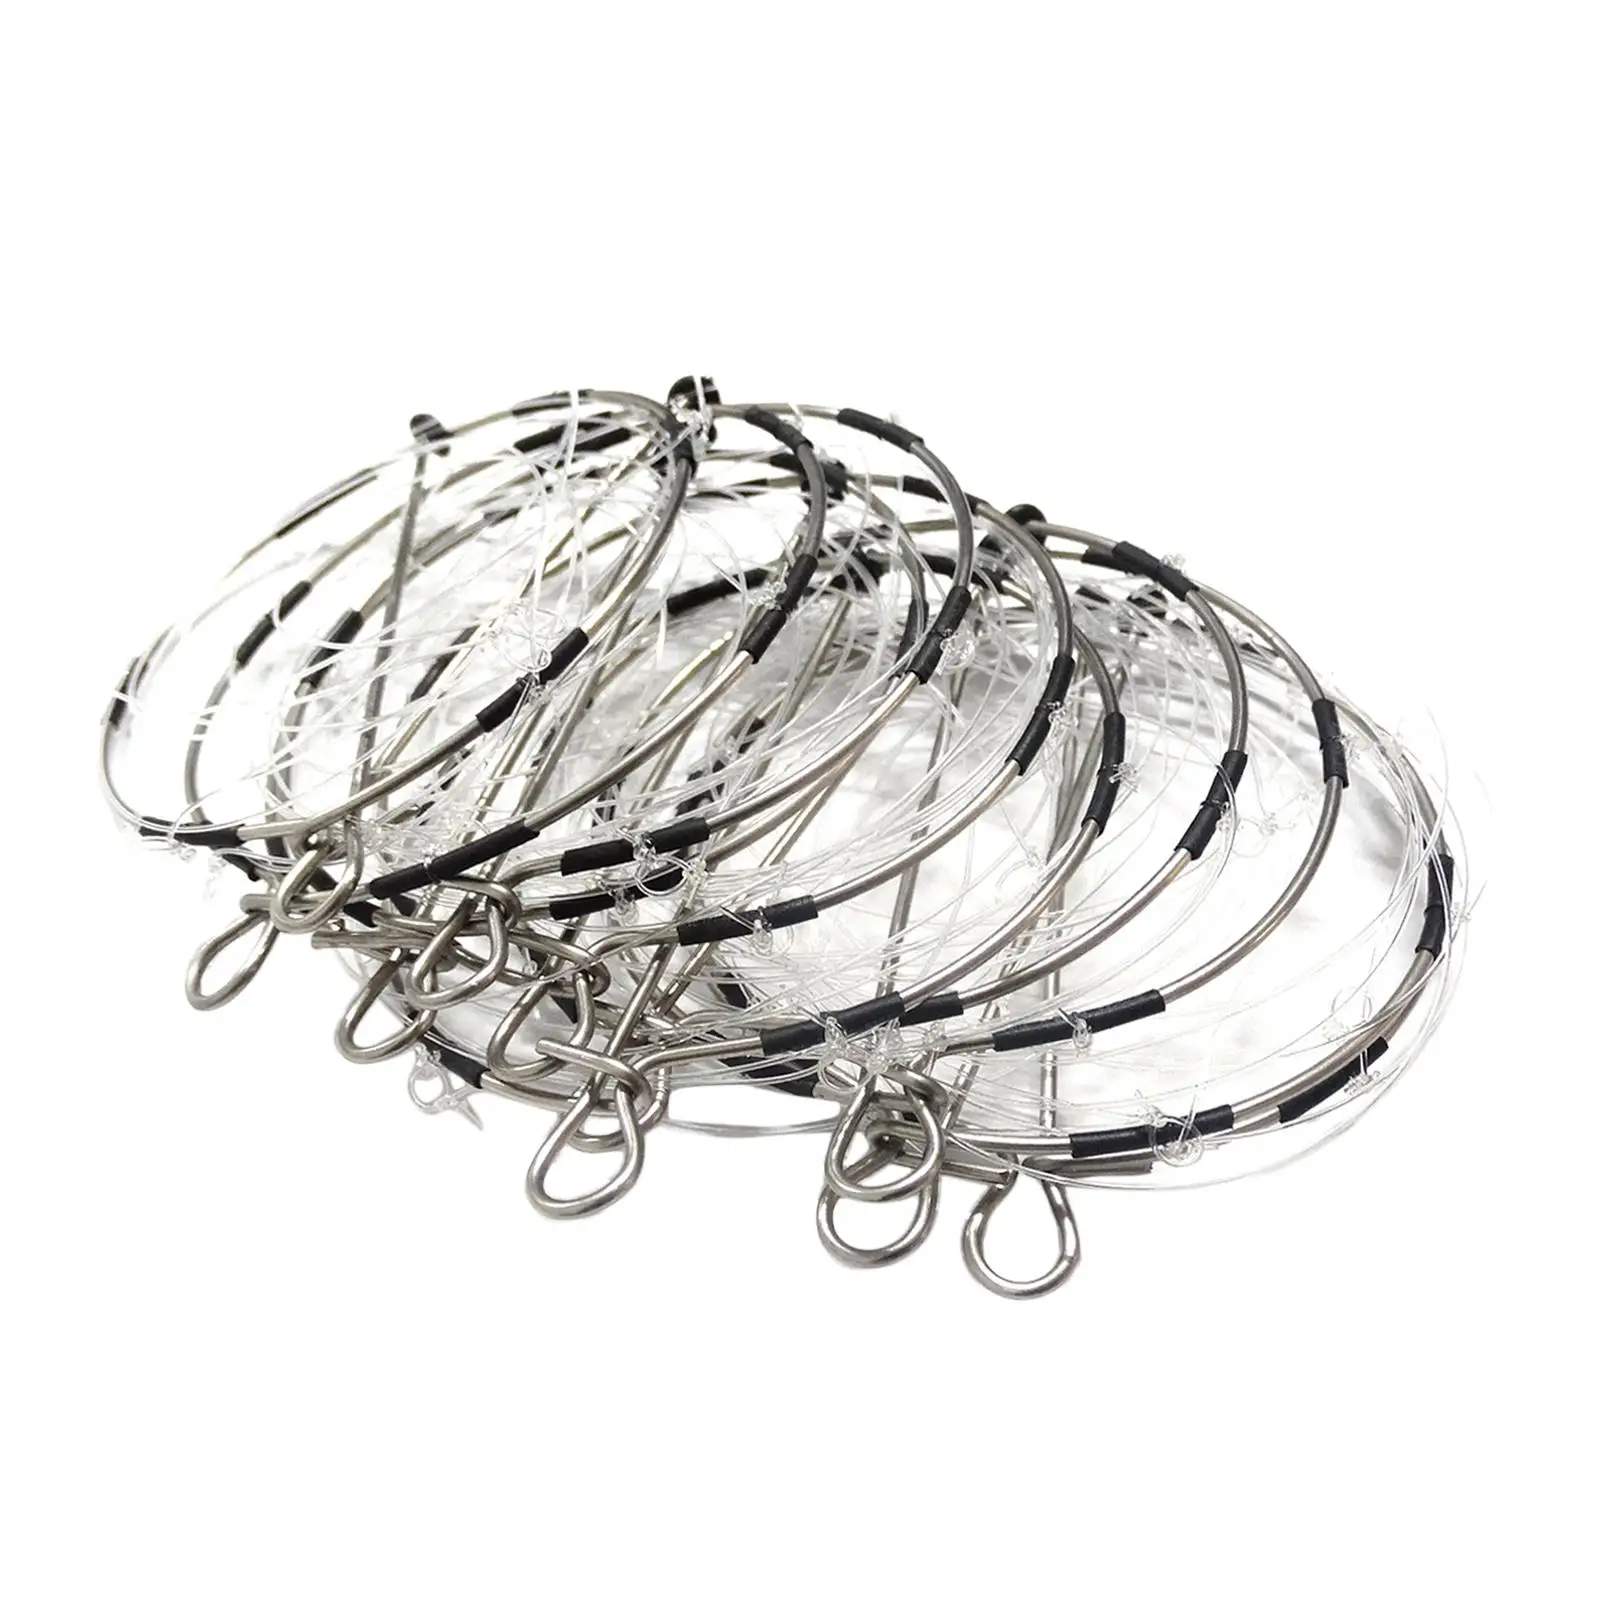 10 Pieces Crab Cast Trap Six Movable Buckles Repeated Use Cast Dip Cage Catch Crabs Tool for Crab Prawn Crawfish shrimp Crawdad